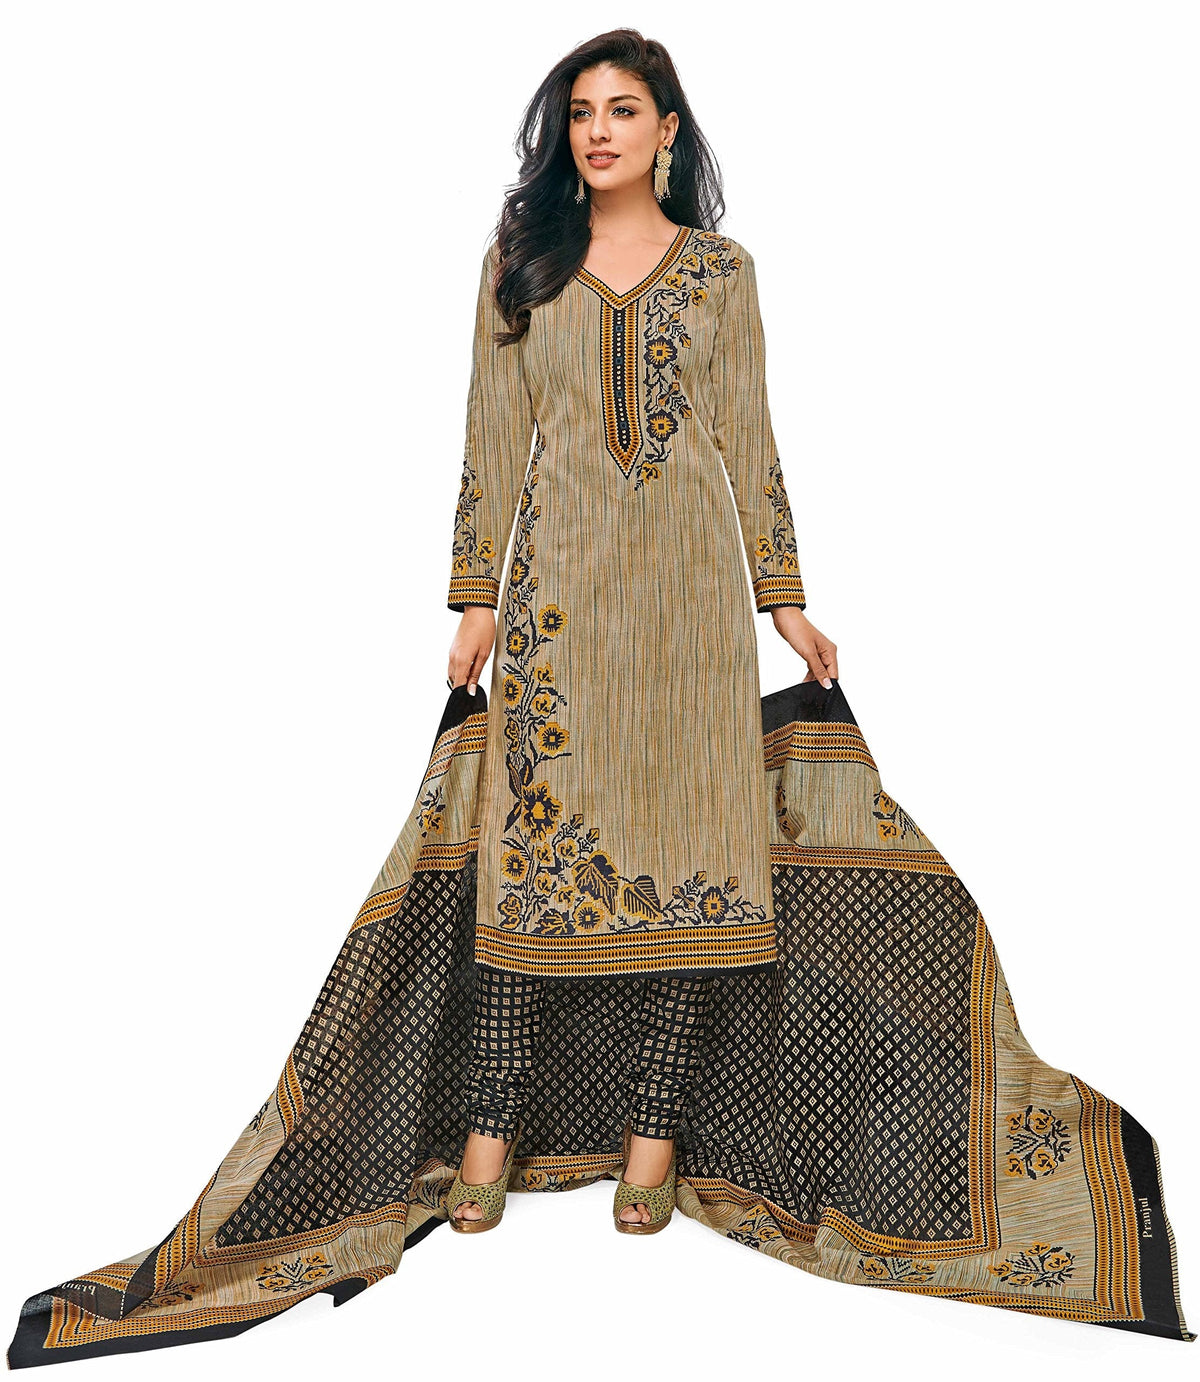 Miraan Women's Cotton Printed Unstitched Dress Material(SGPRI603_Brown_Free Size) -  Shalwar Materials in Sri Lanka from Arcade Online Shopping - Just Rs. 7778!